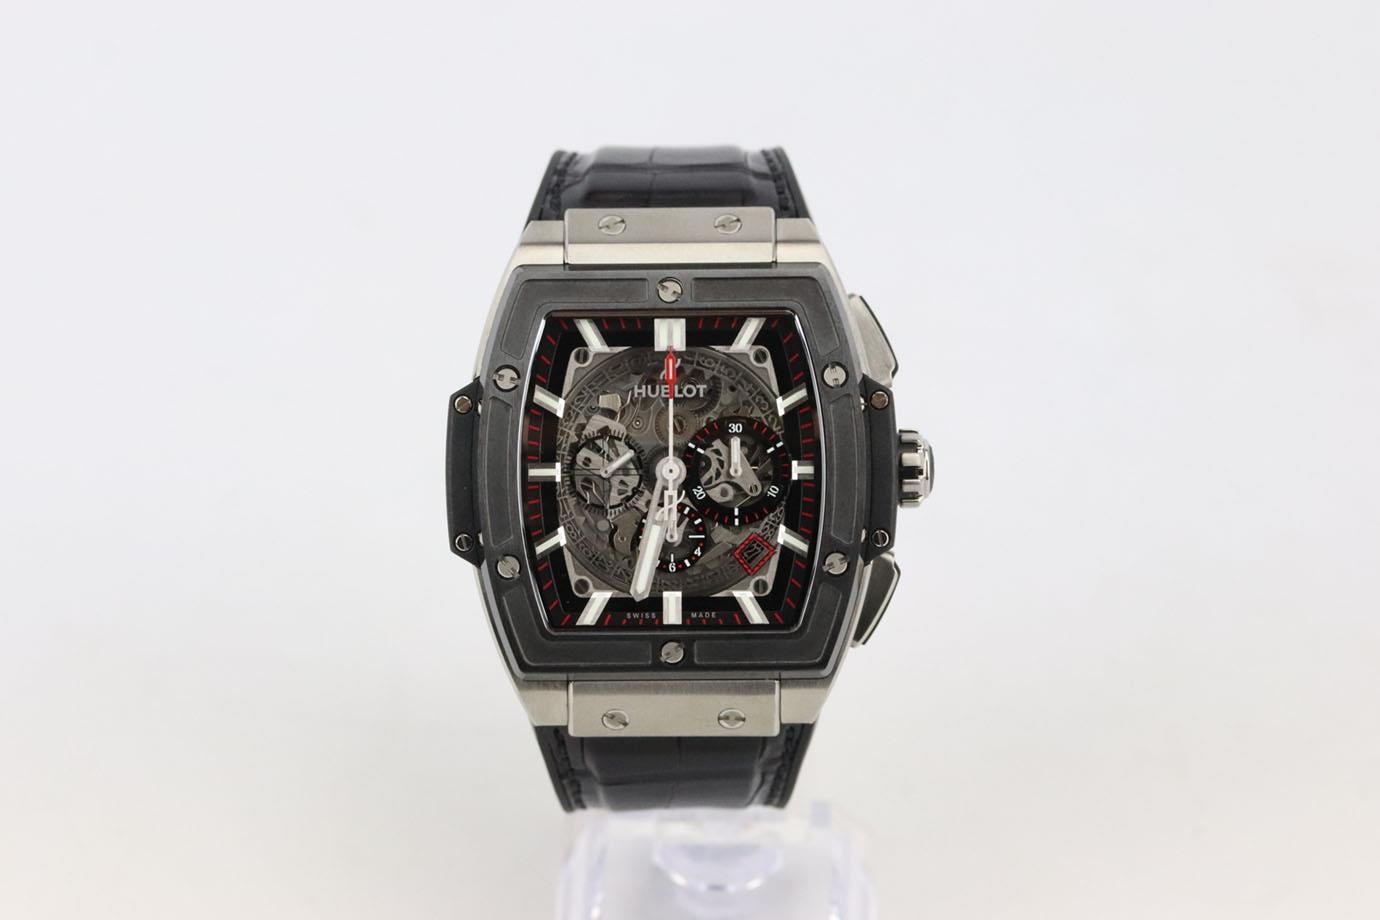 Hublot Spirit of Big Bang titanium ceramic 45mm wrist watch. This ’Spirit of Big Bang’ 45mm watch by Hublot has been crafted at the brand's Swiss atelier from titanium with an intricate automatic movement and has a black dial and finished with a